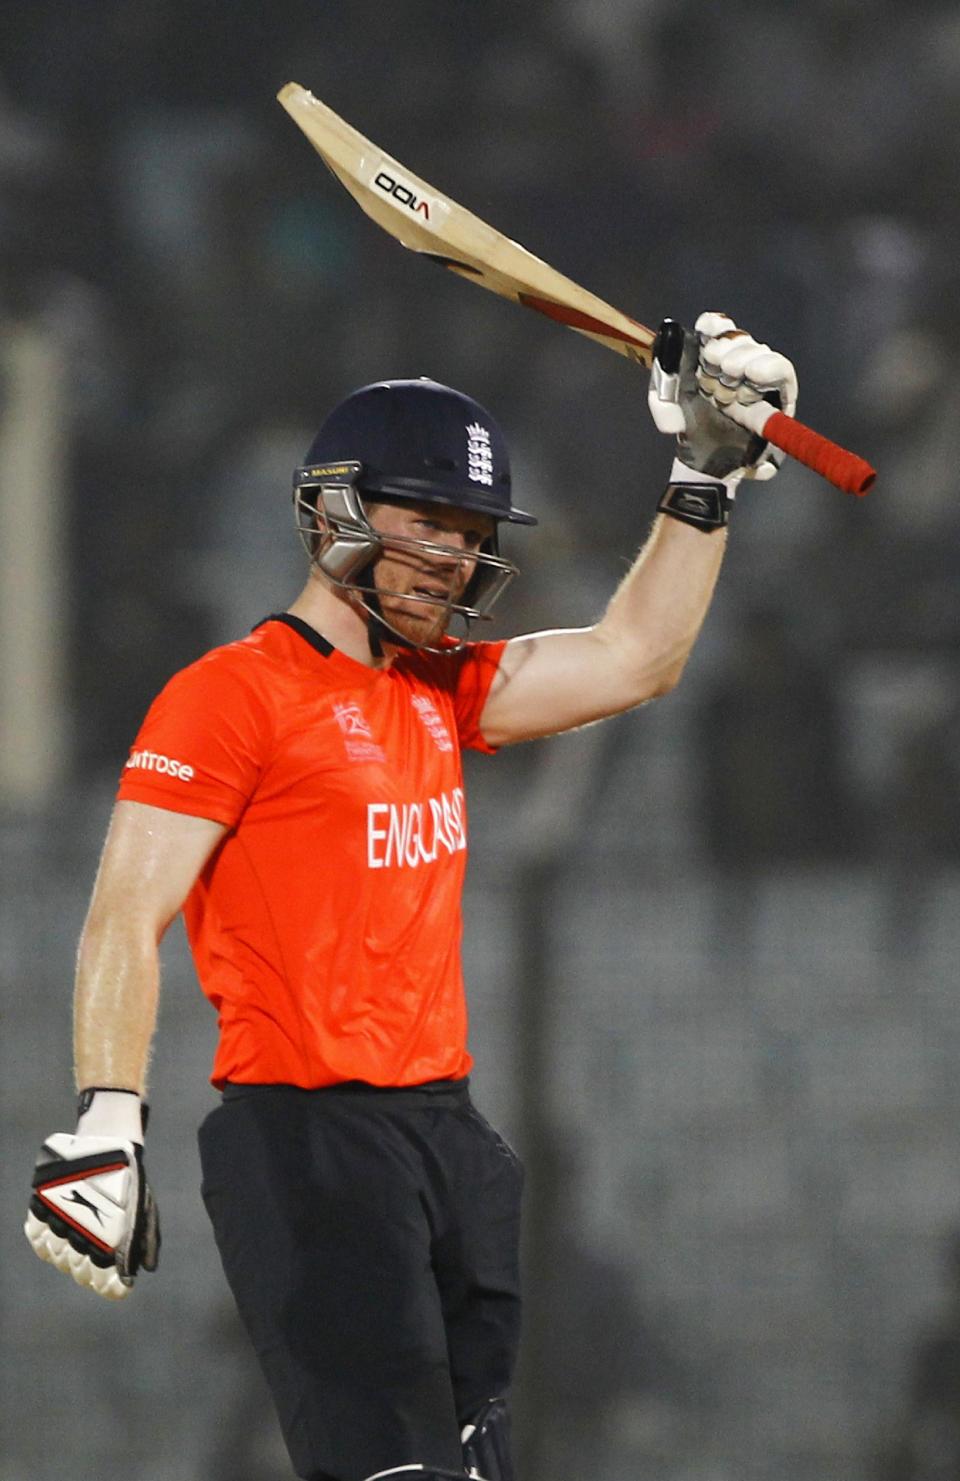 England's Eoin Morgan acknowledges the crowd after scoring a half century during their ICC Twenty20 Cricket World Cup match in Chittagong, Bangladesh, Thursday, March 27, 2014. (AP Photo/A.M. Ahad)